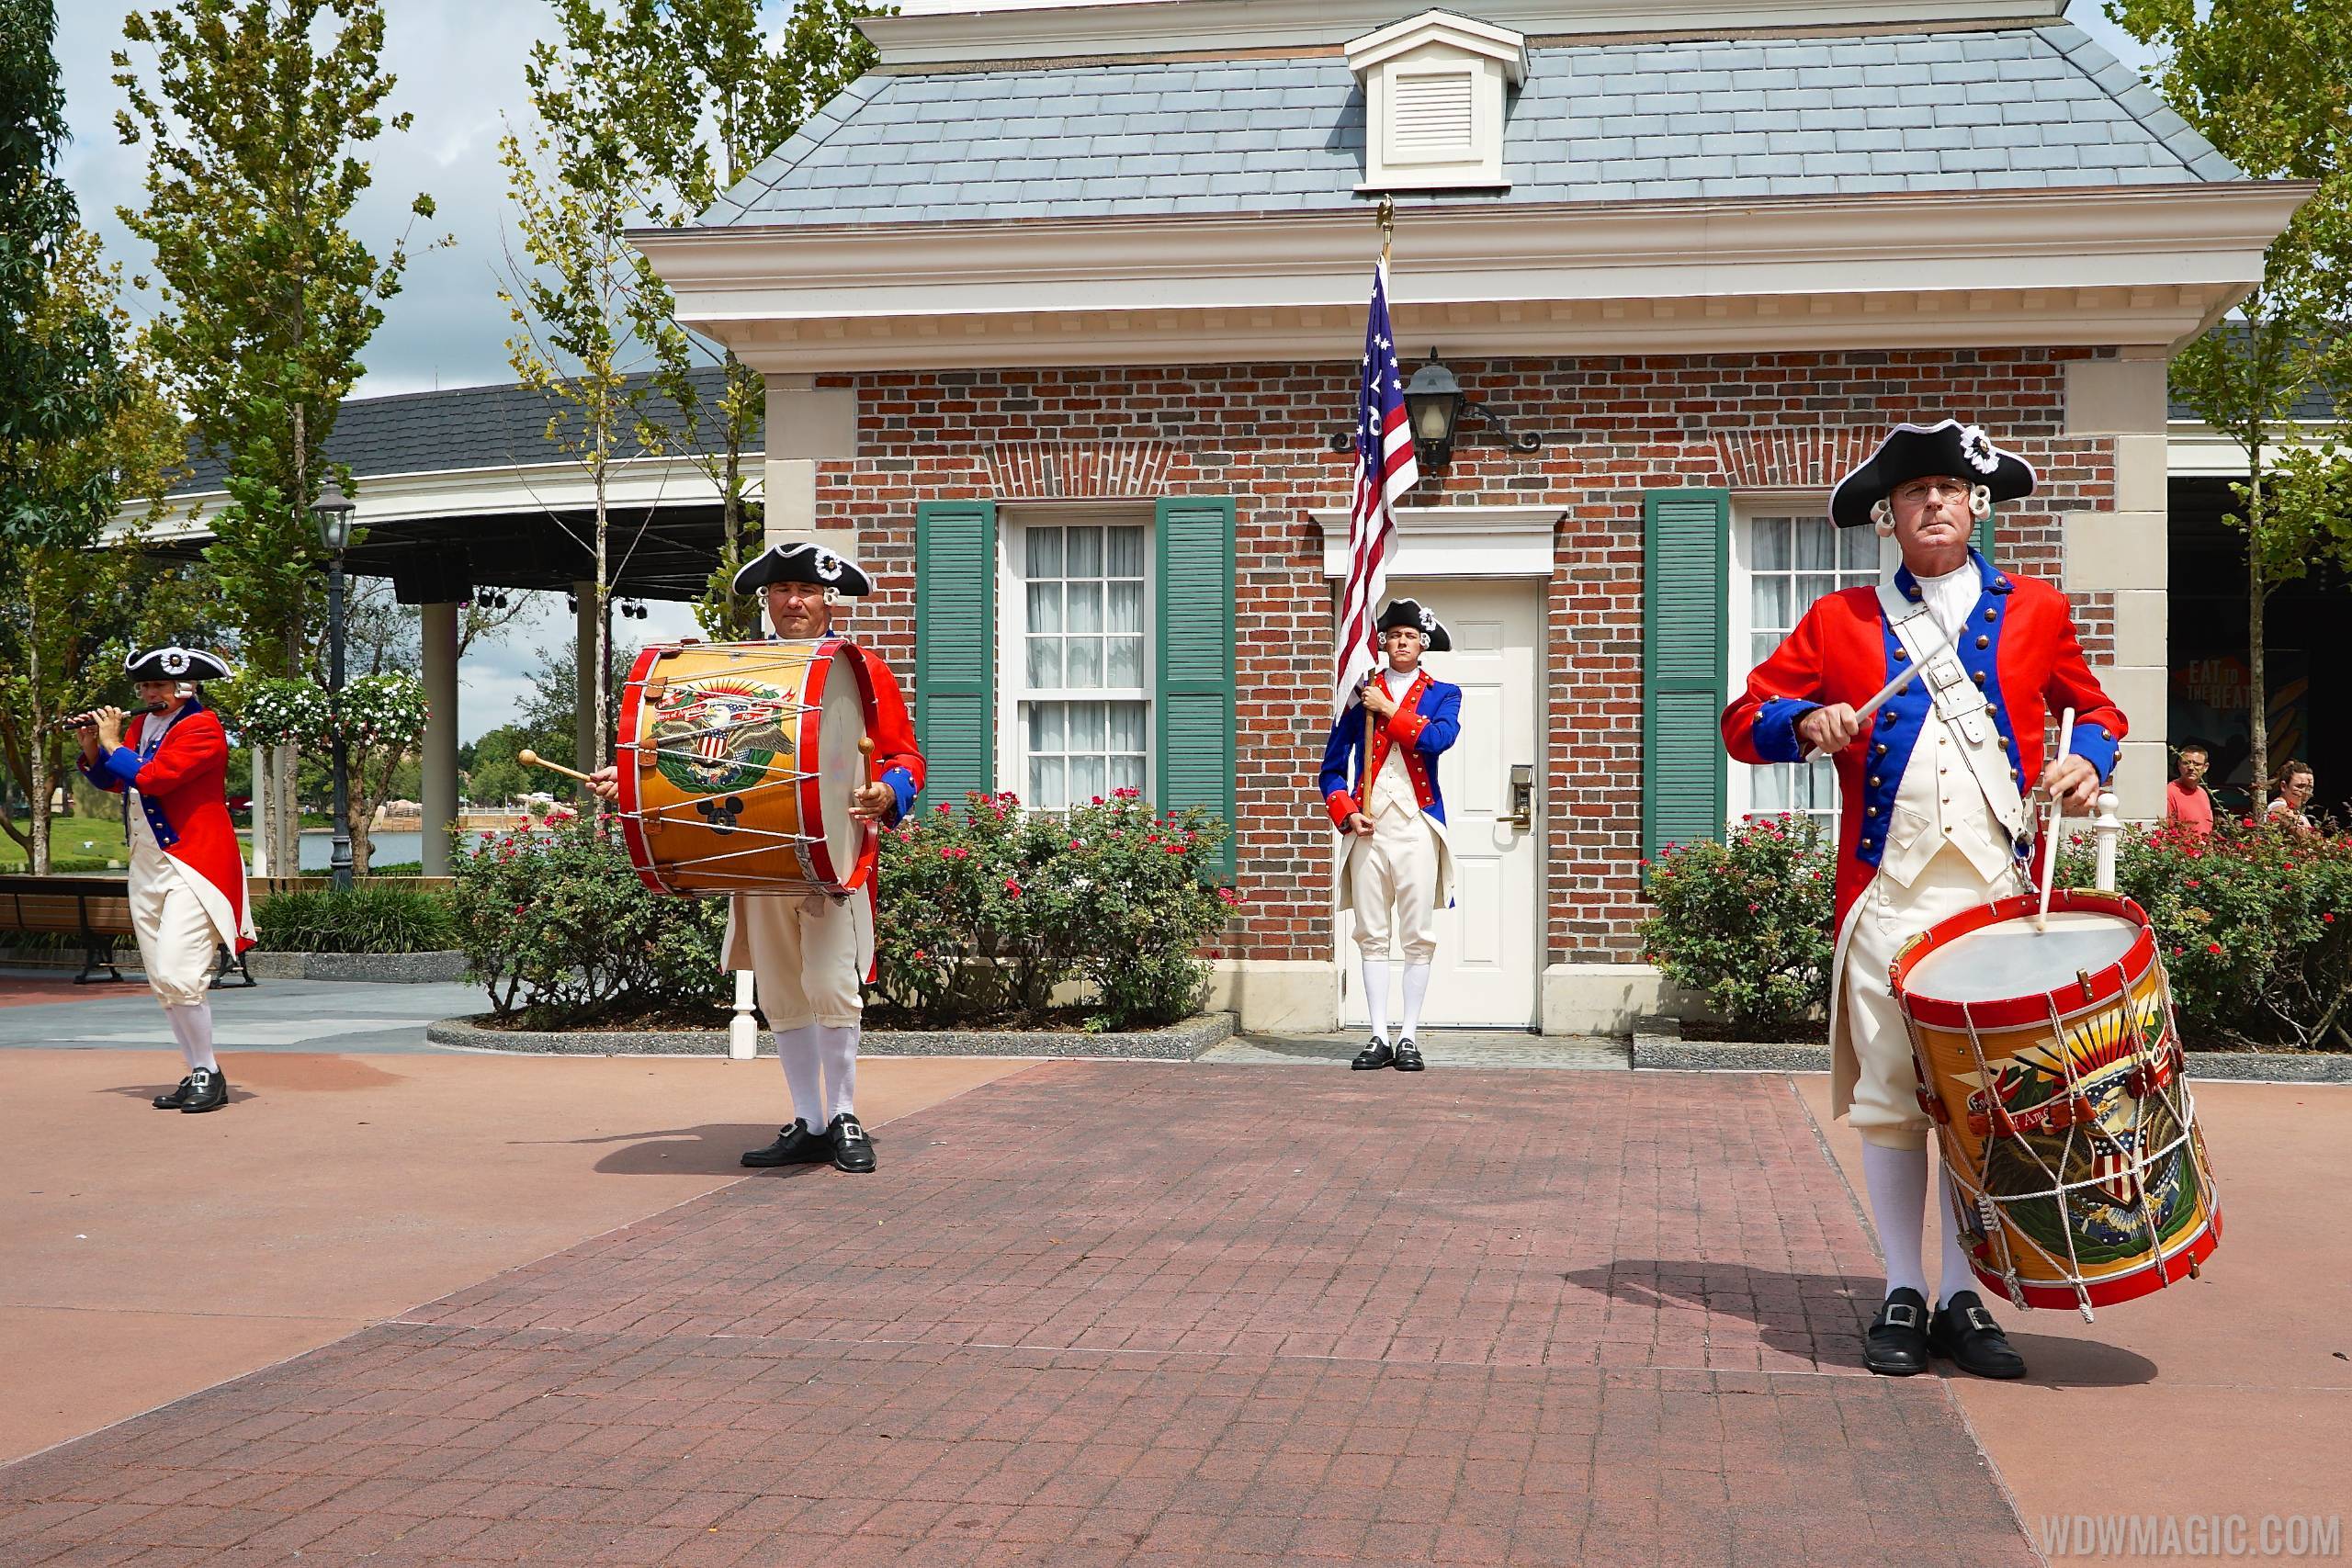 Spirit of America Fife and Drum Corps performance